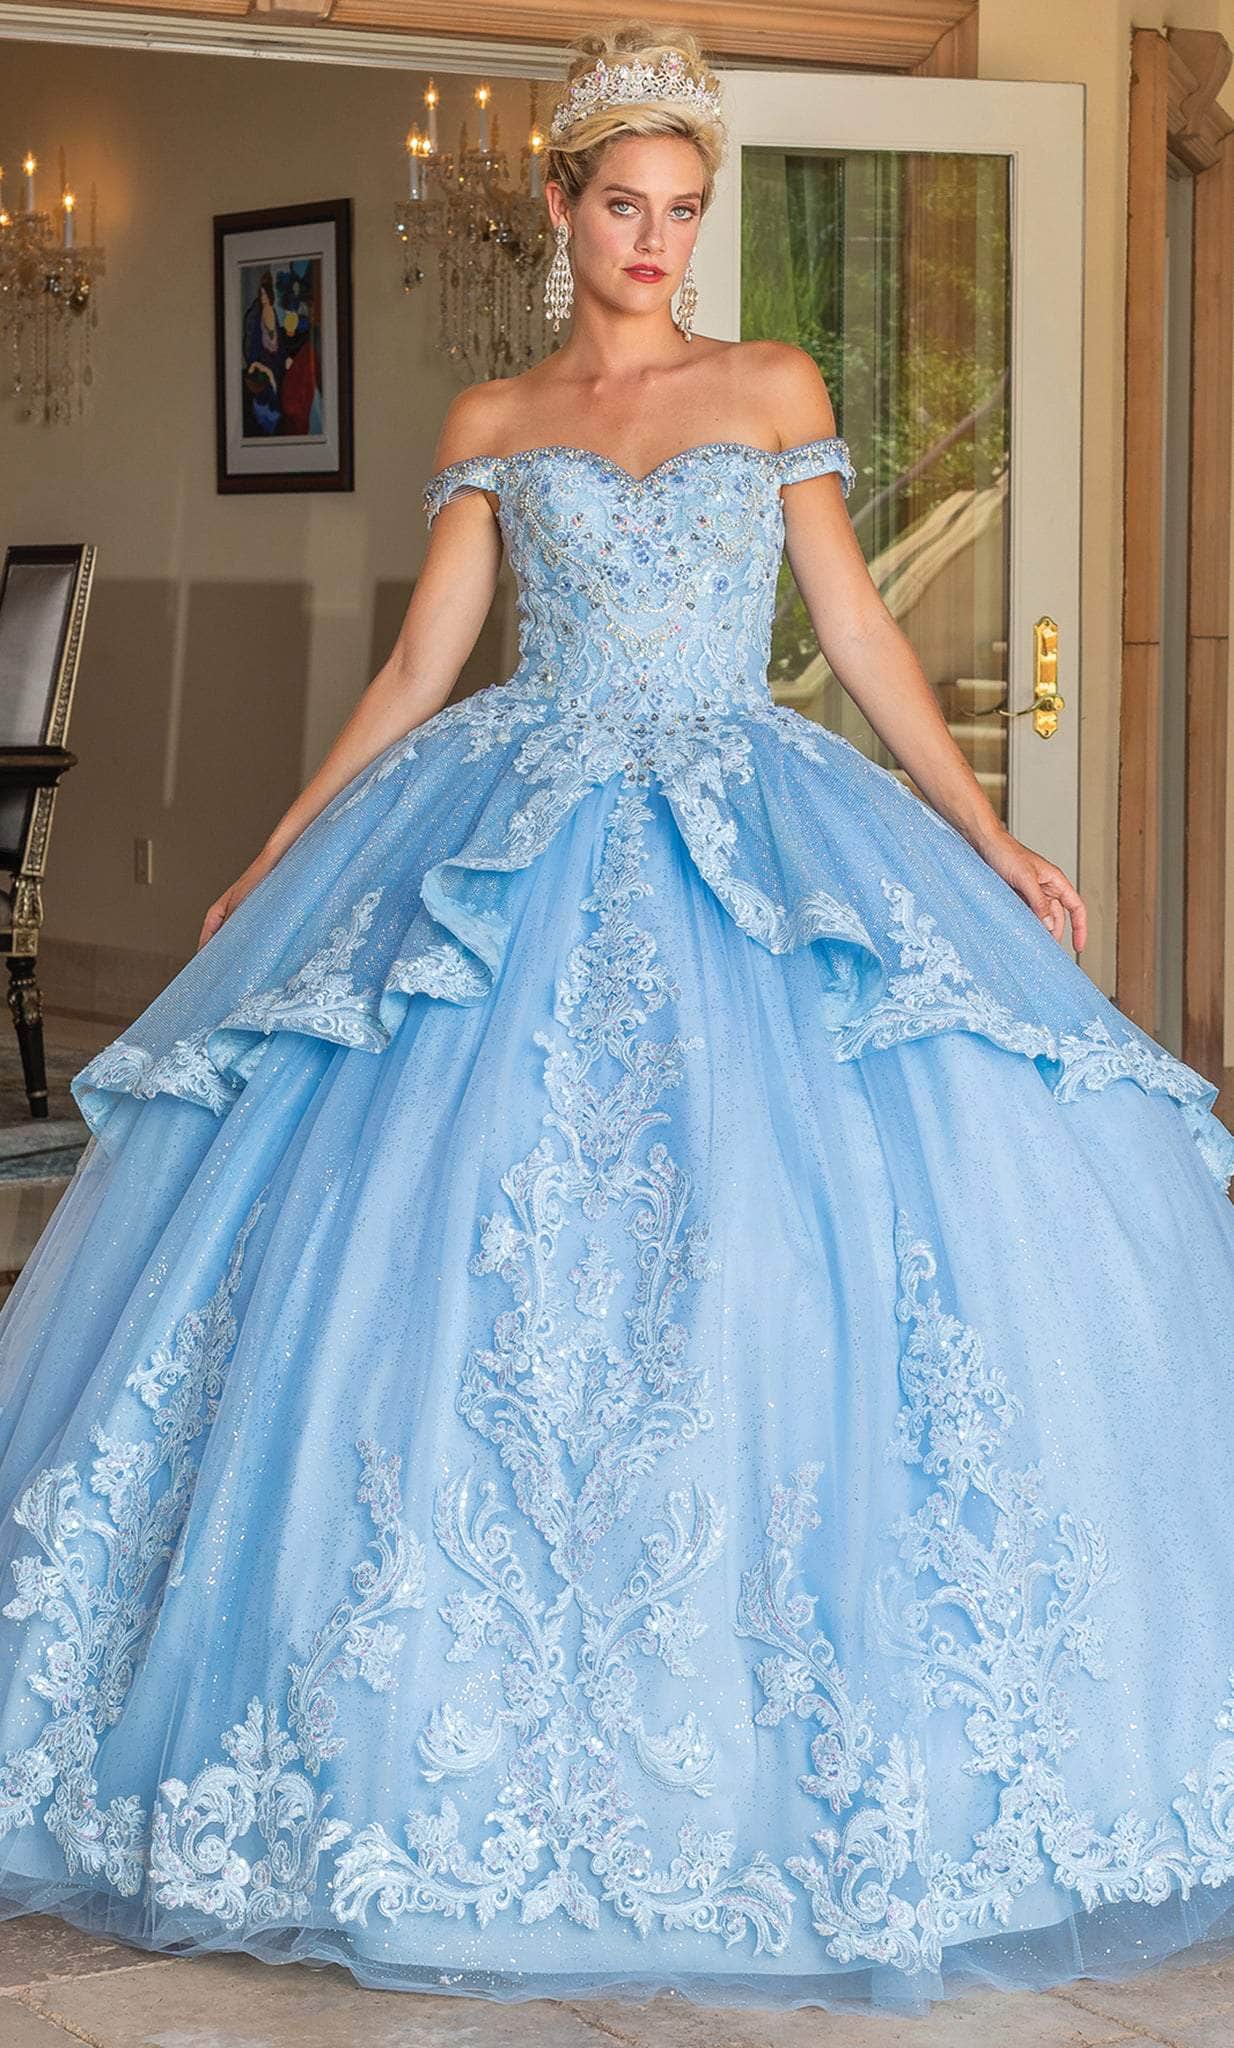 Image of Dancing Queen 1741 - Embellished Sweetheart Ballgown